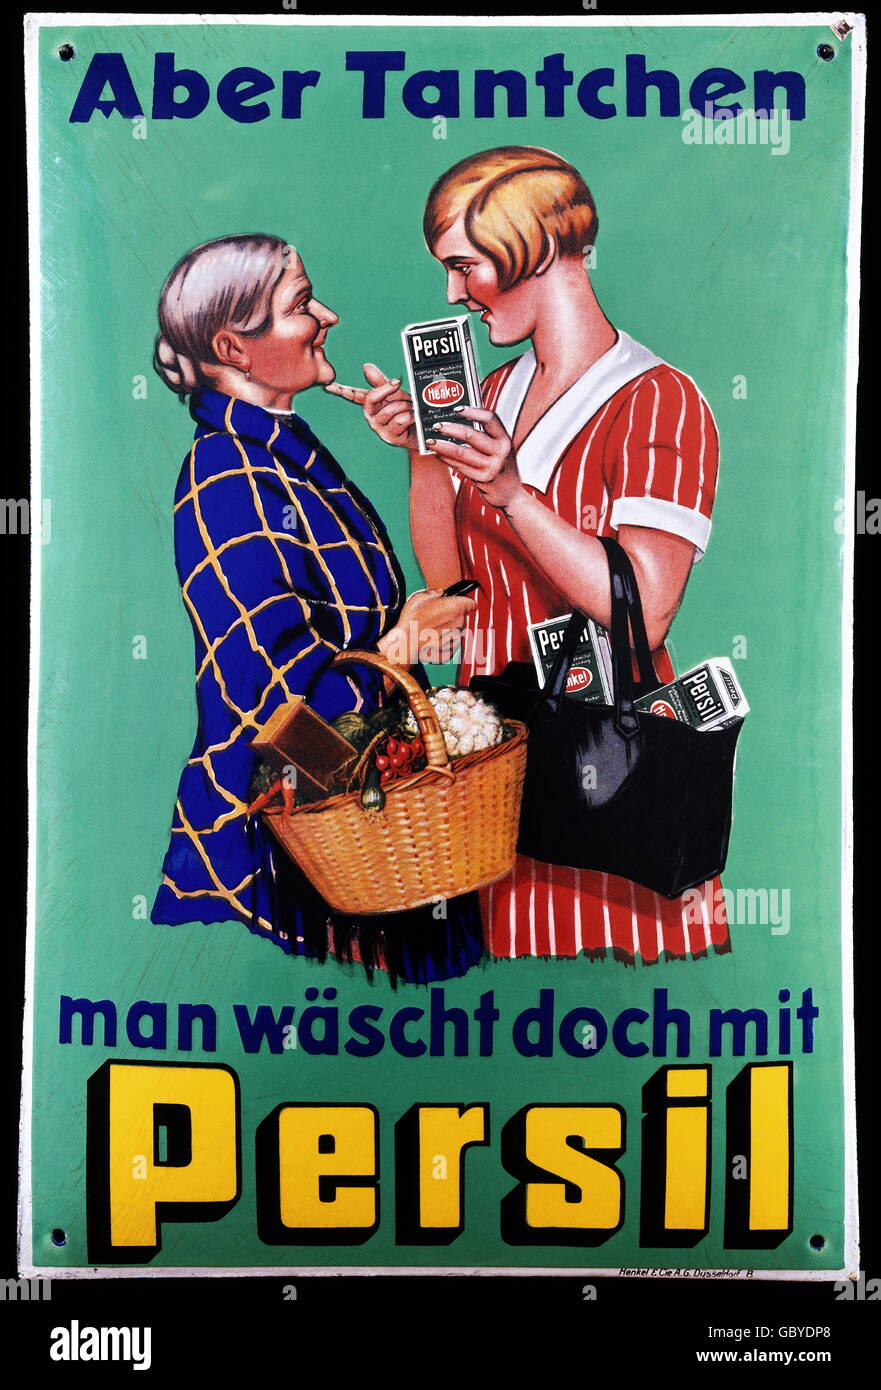 advertising, household, washing powder, Persil, 'Aber Tantchen man waescht doch mit Persil', Duesseldorf, Germany, porcelain enamel sign, circa 1927, Additional-Rights-Clearences-Not Available Stock Photo